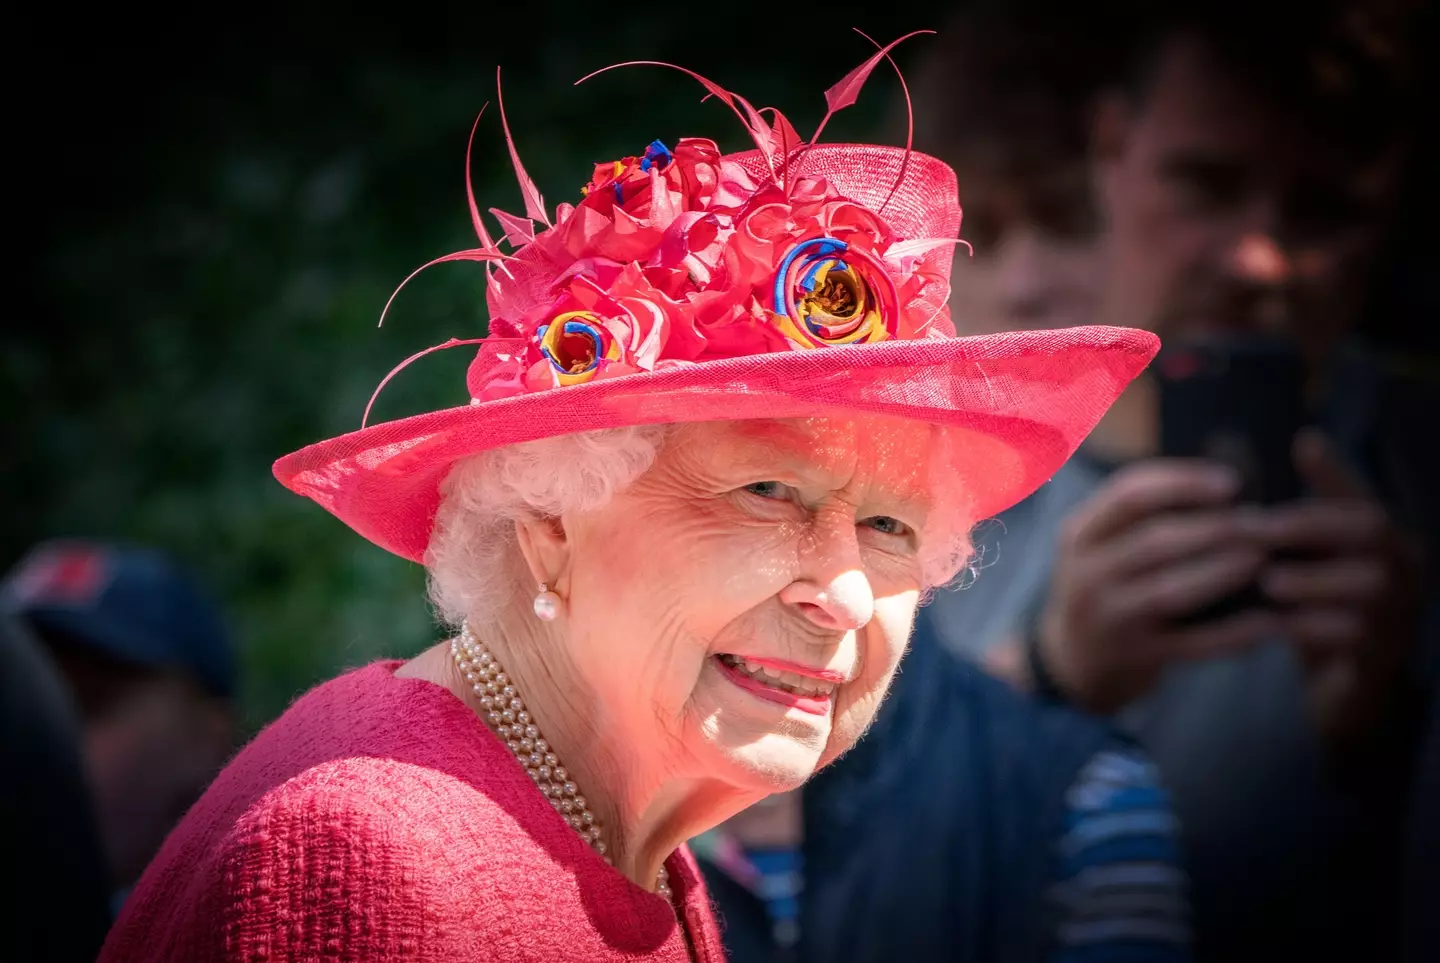 The Queen has garnered an impressive collection of jewellery over the years.